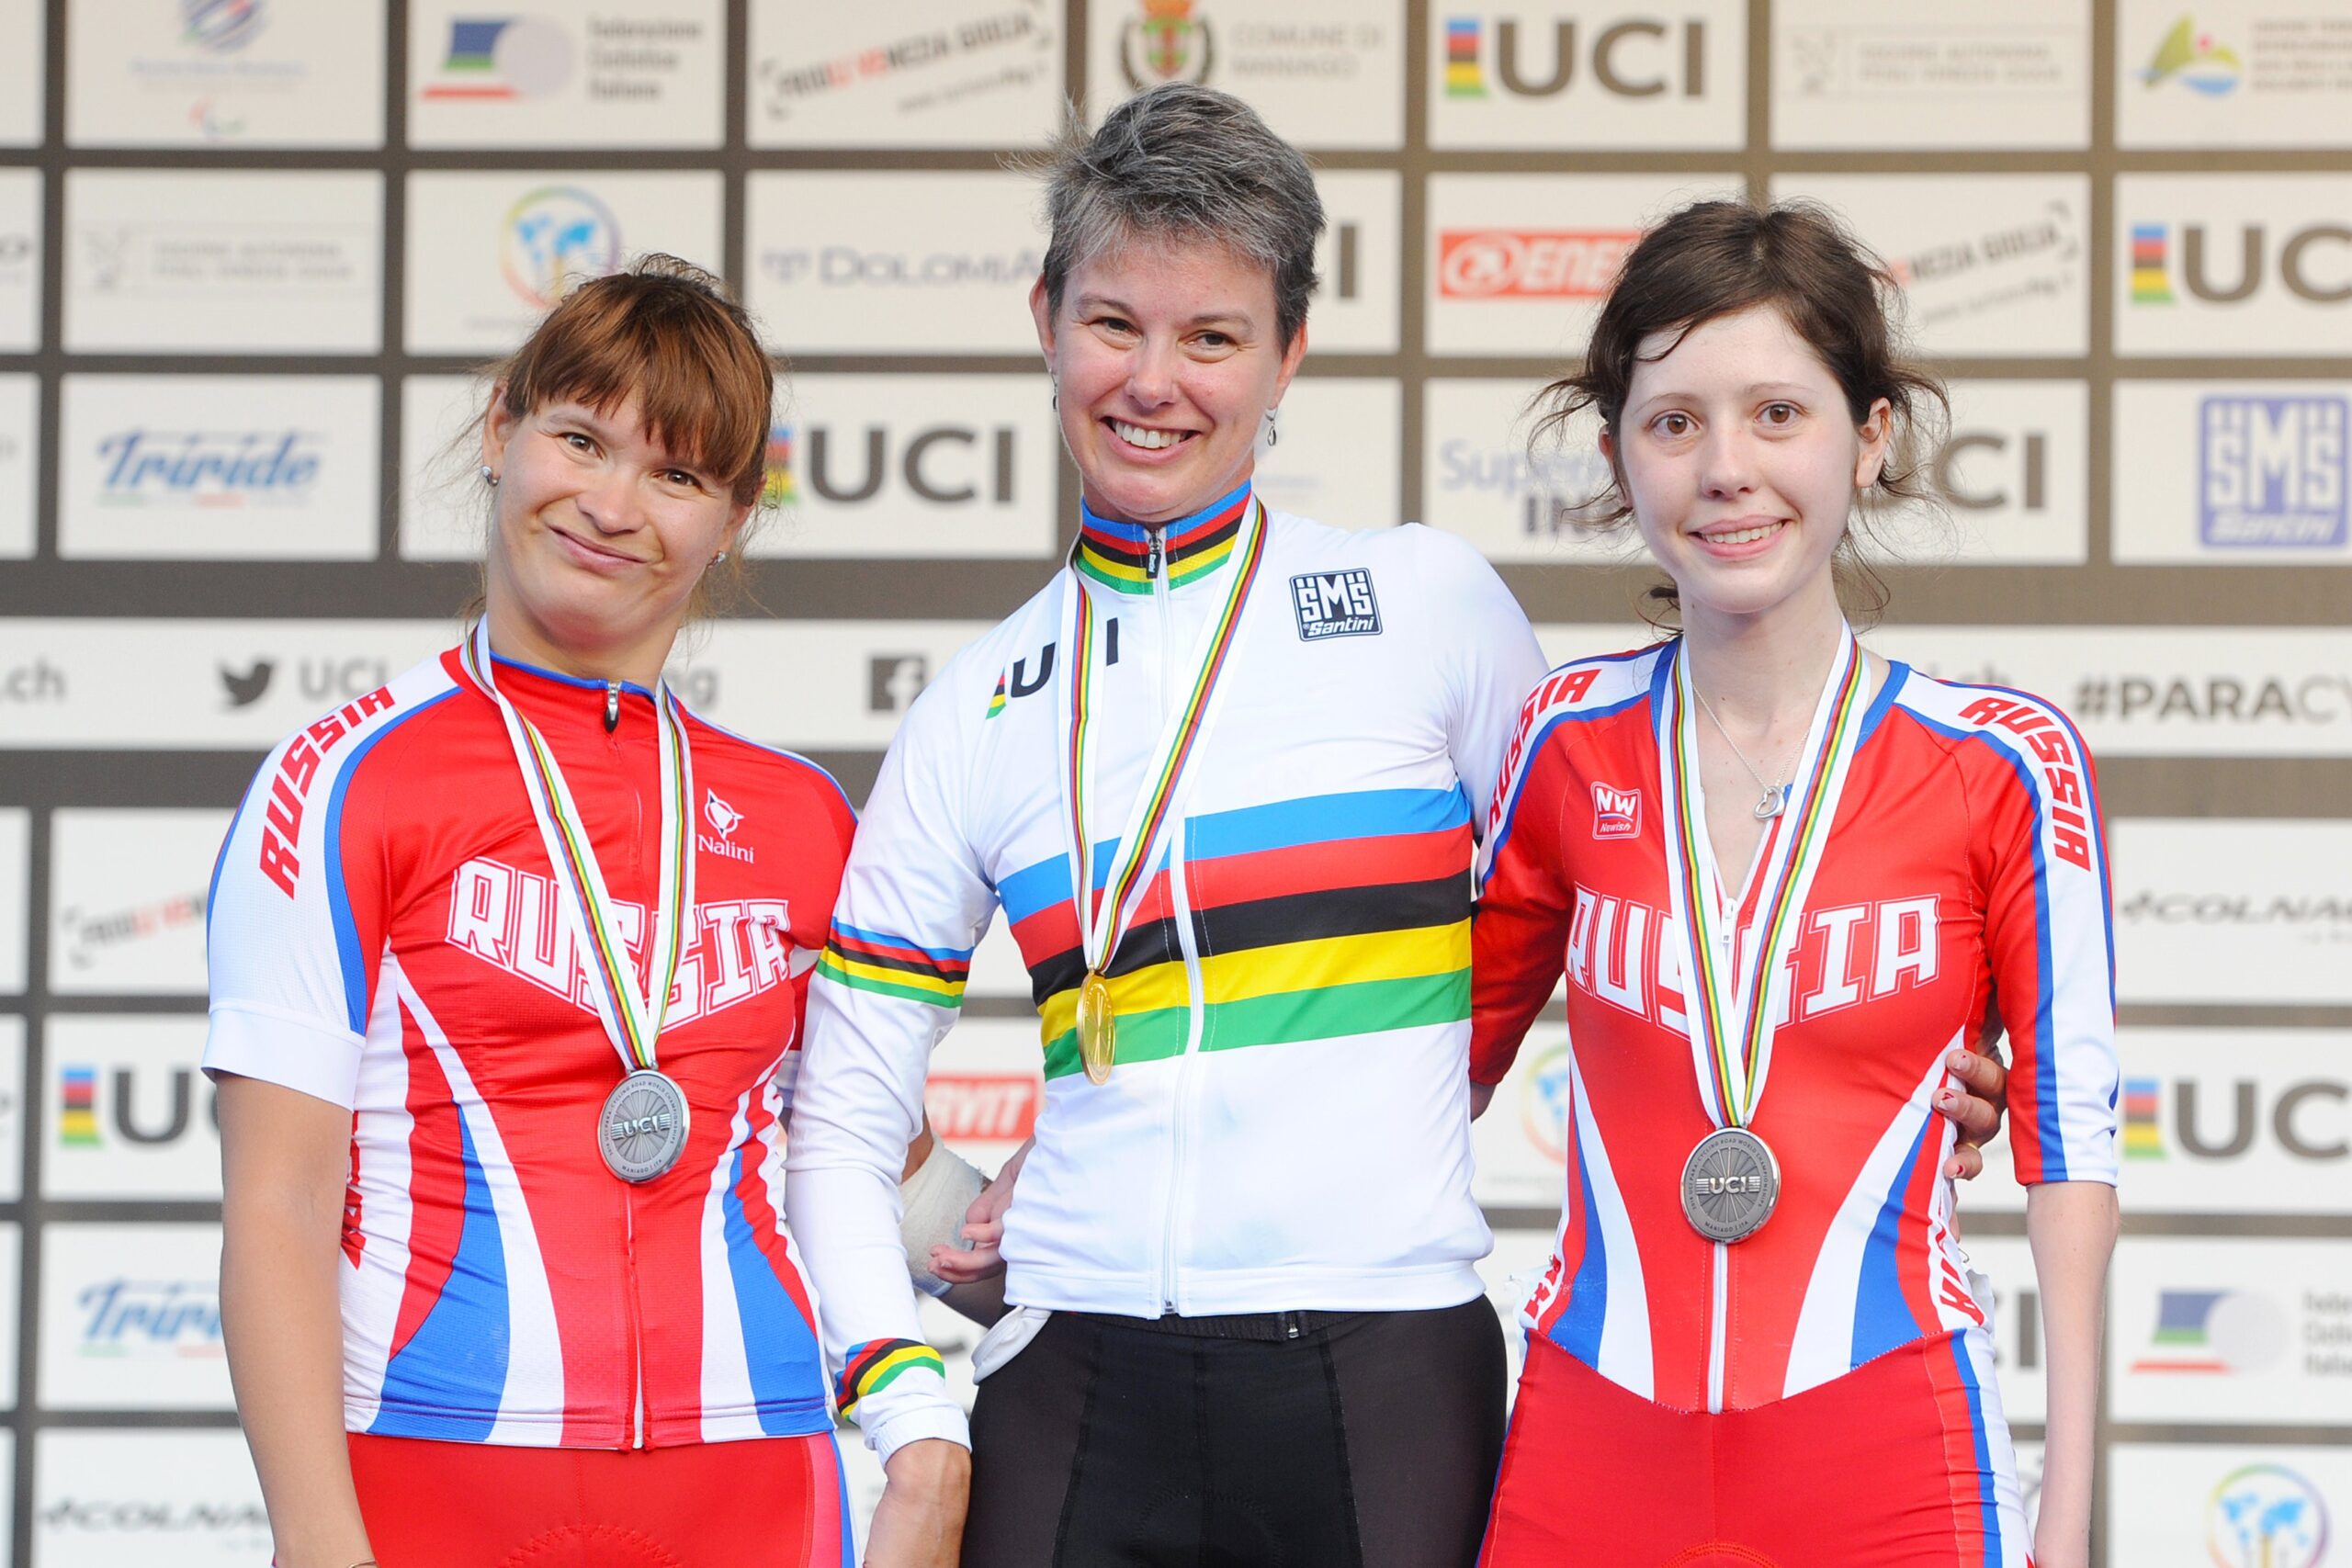 Shelley Gautier in her rainbow jersey at the UCI Para Cycling Road World Championships